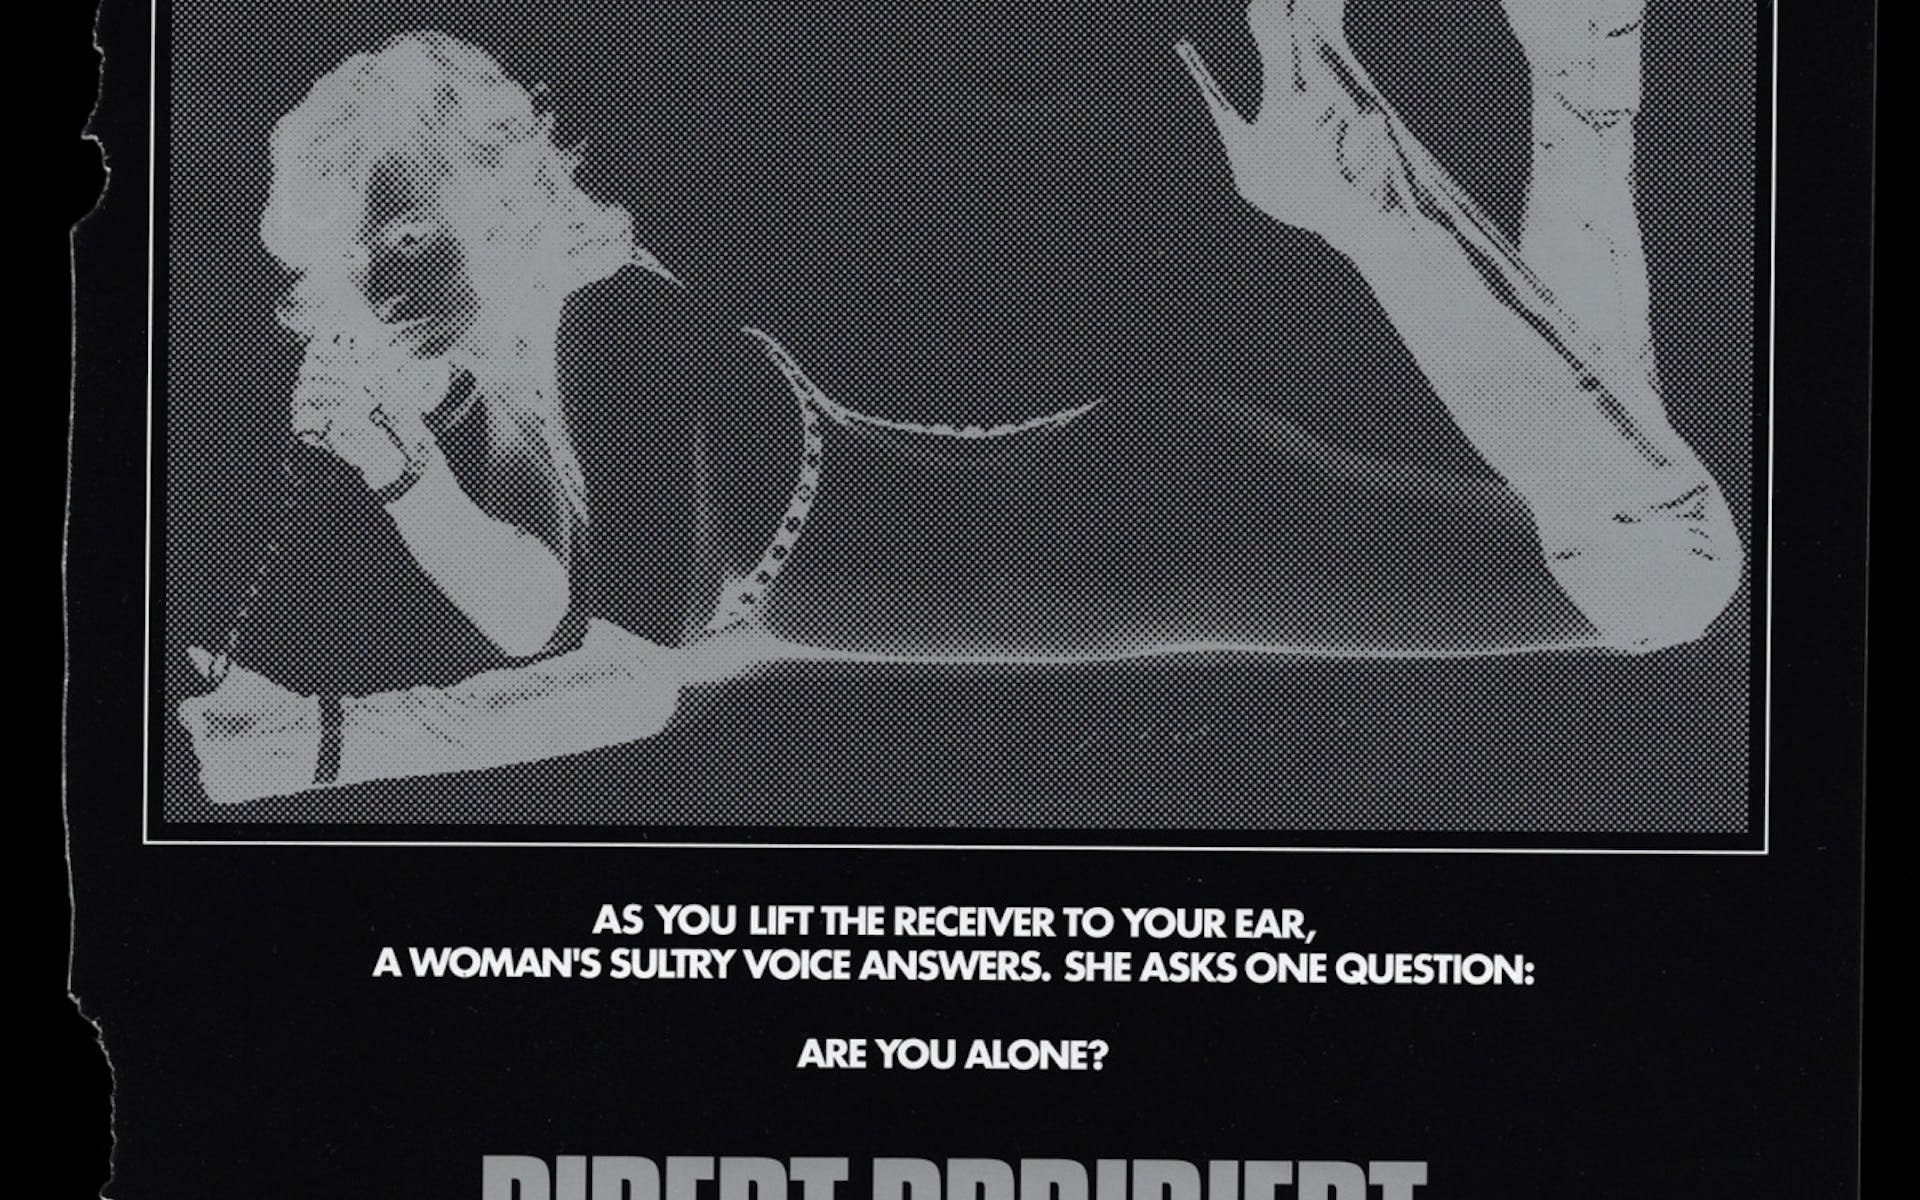 Image of advertisement featuring an inverted image of a woman lying on the floor and typography